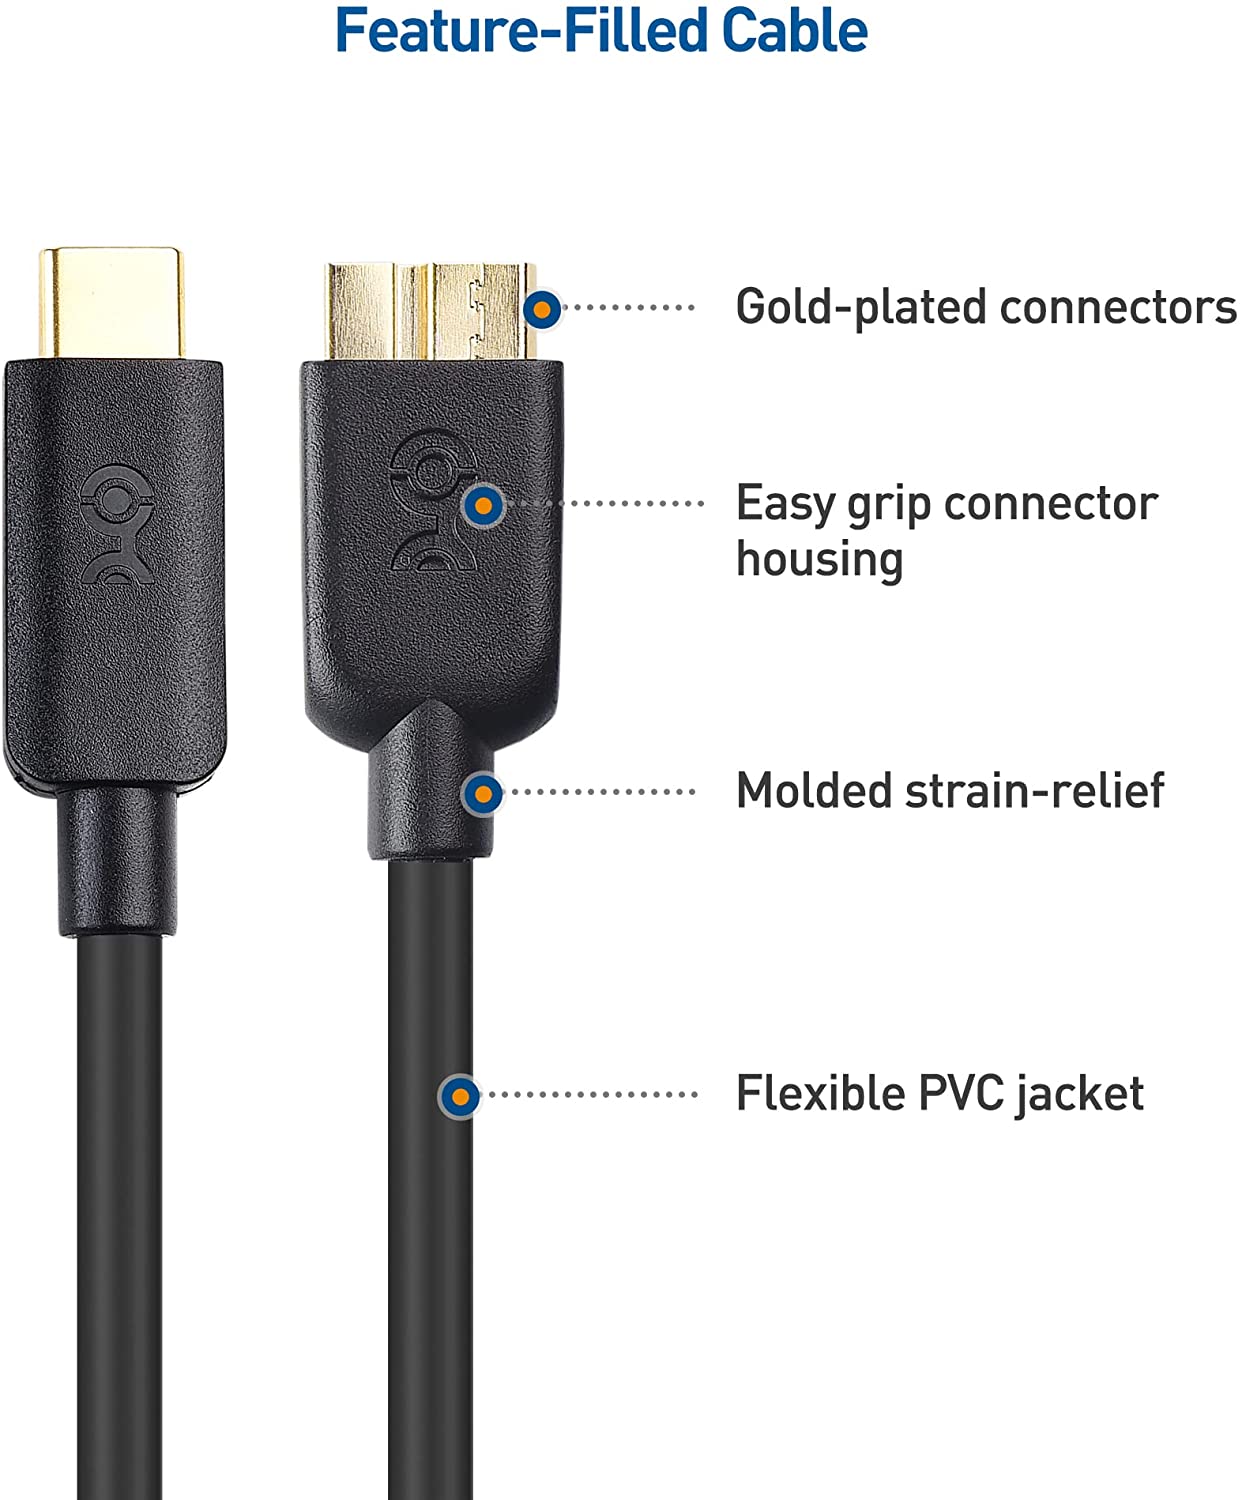 Cable Matters USB C to Micro USB 3.0 Cable (USB C to Micro B 3.0, USB C Hard Drive Cable) in Black 3.3 Feet - image 5 of 7